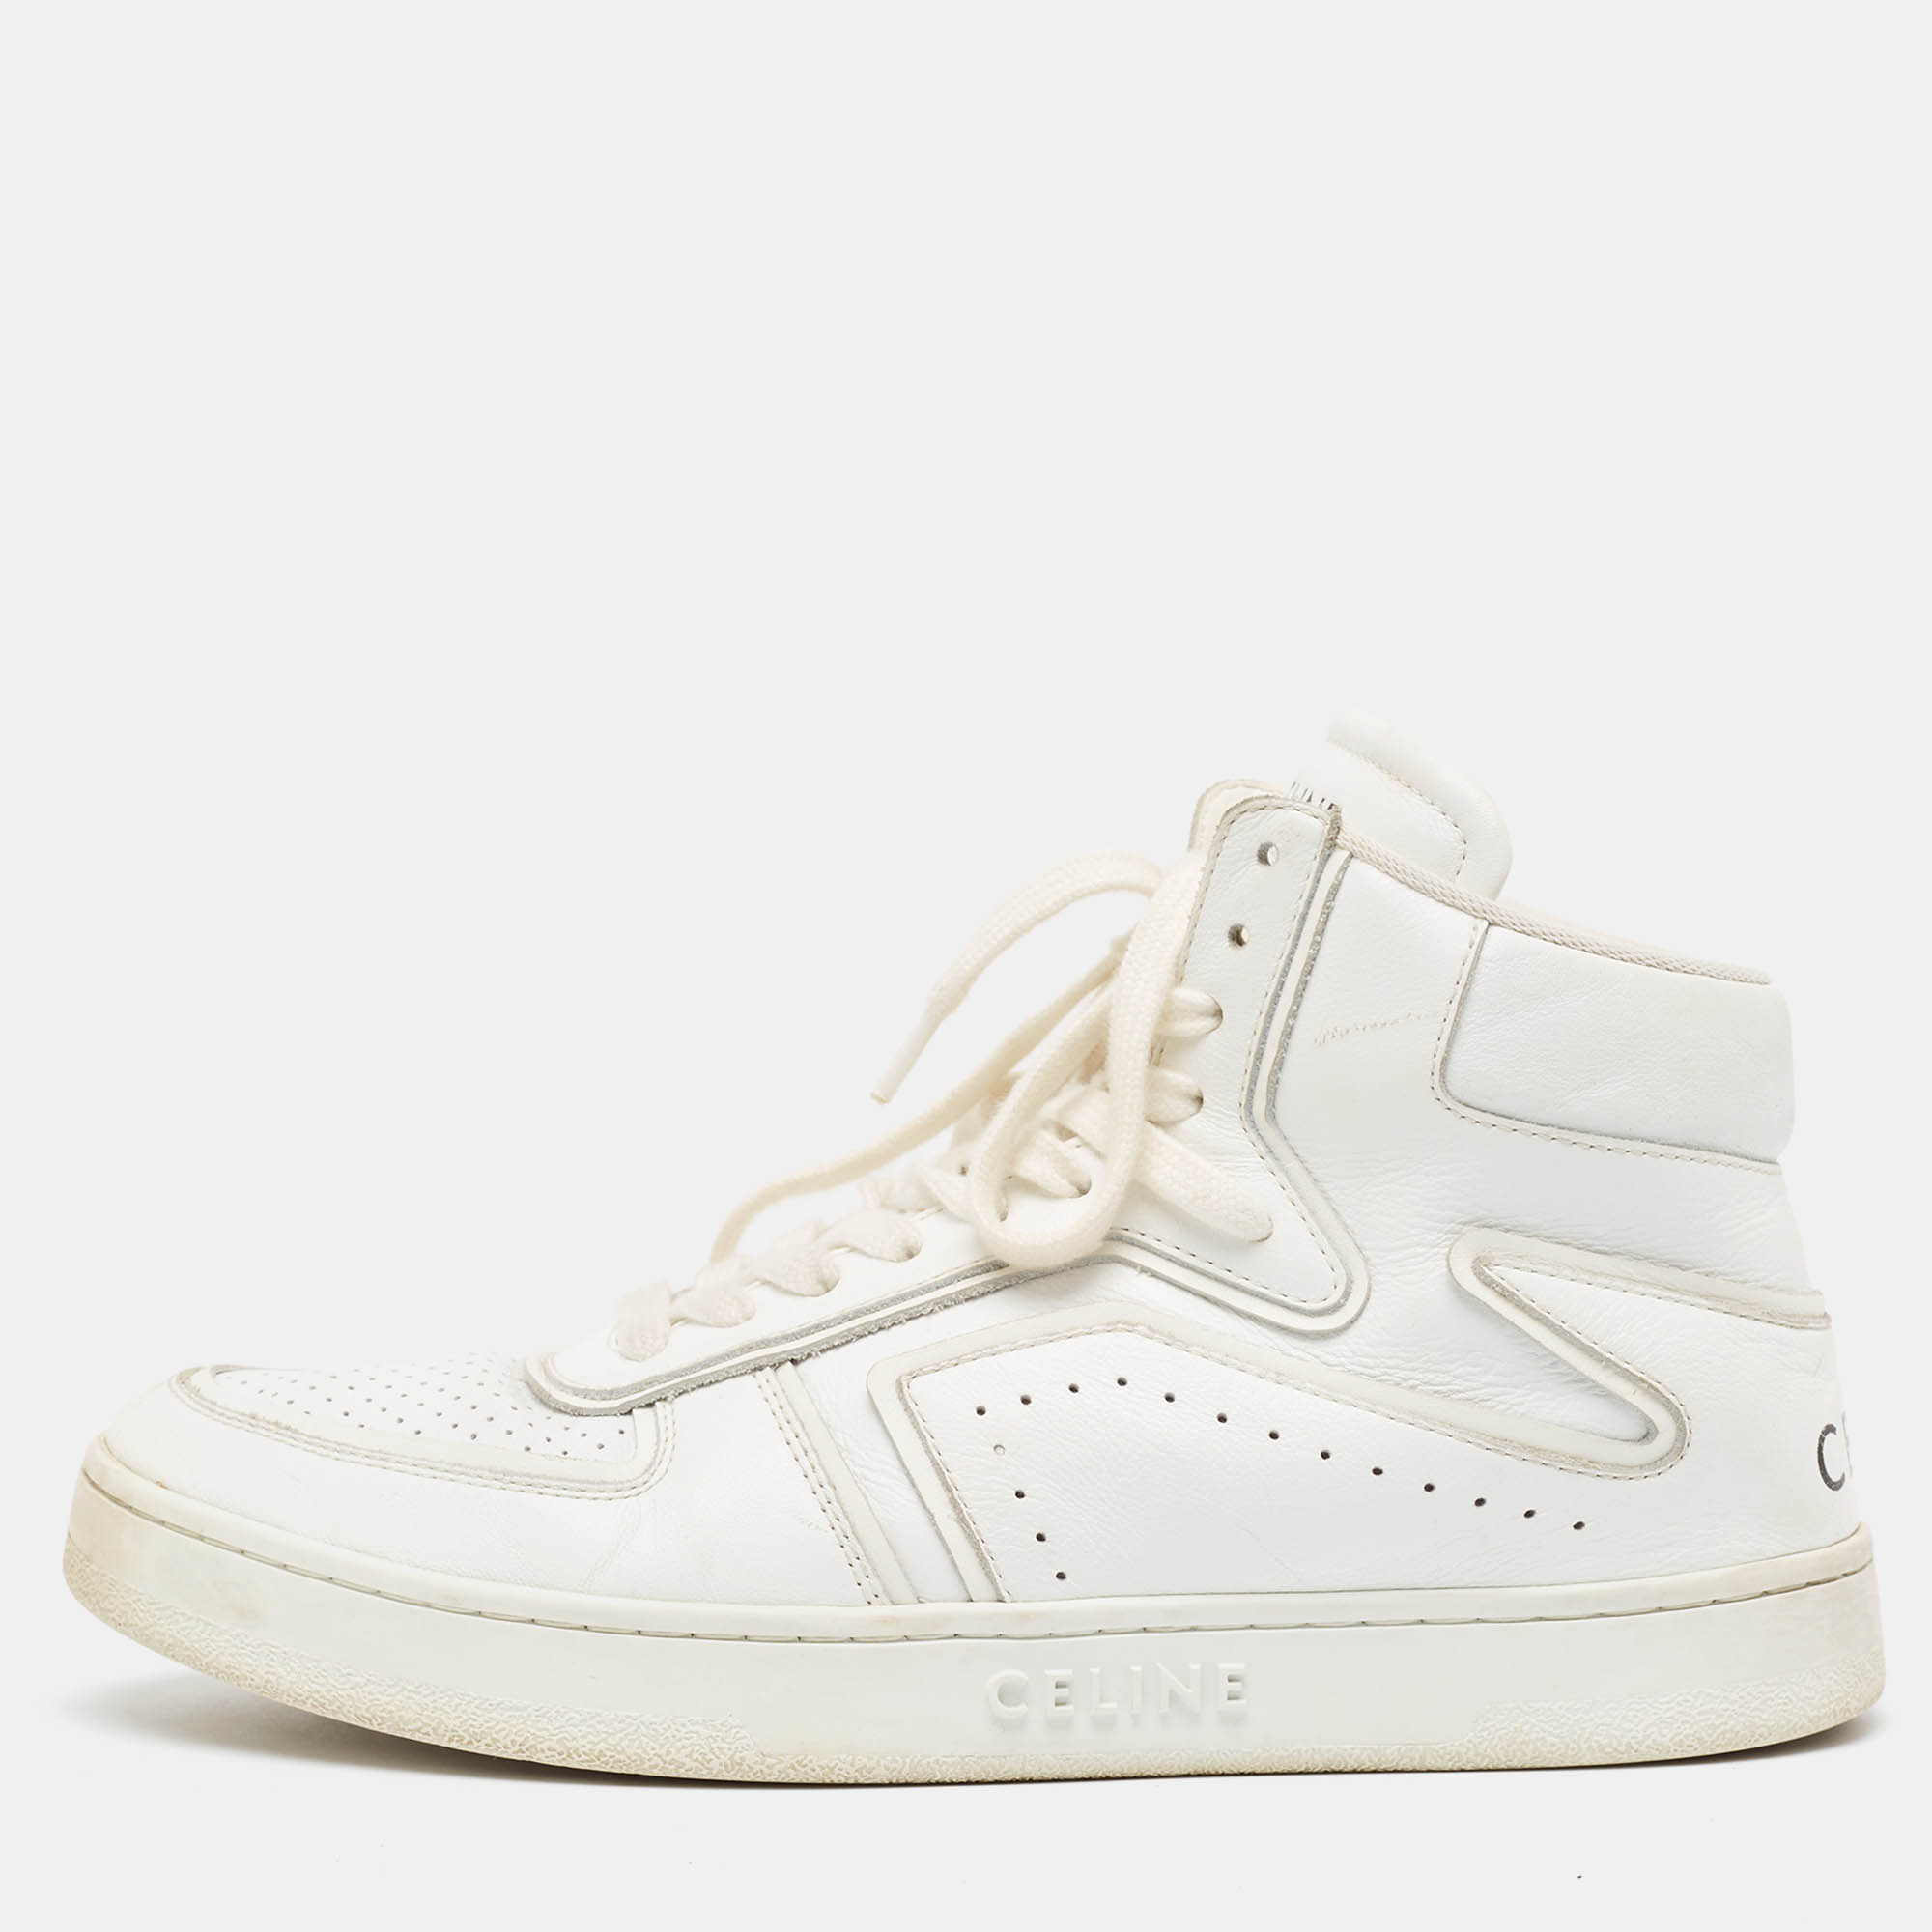 Celine white leather ct-01 z high top sneakers size 39